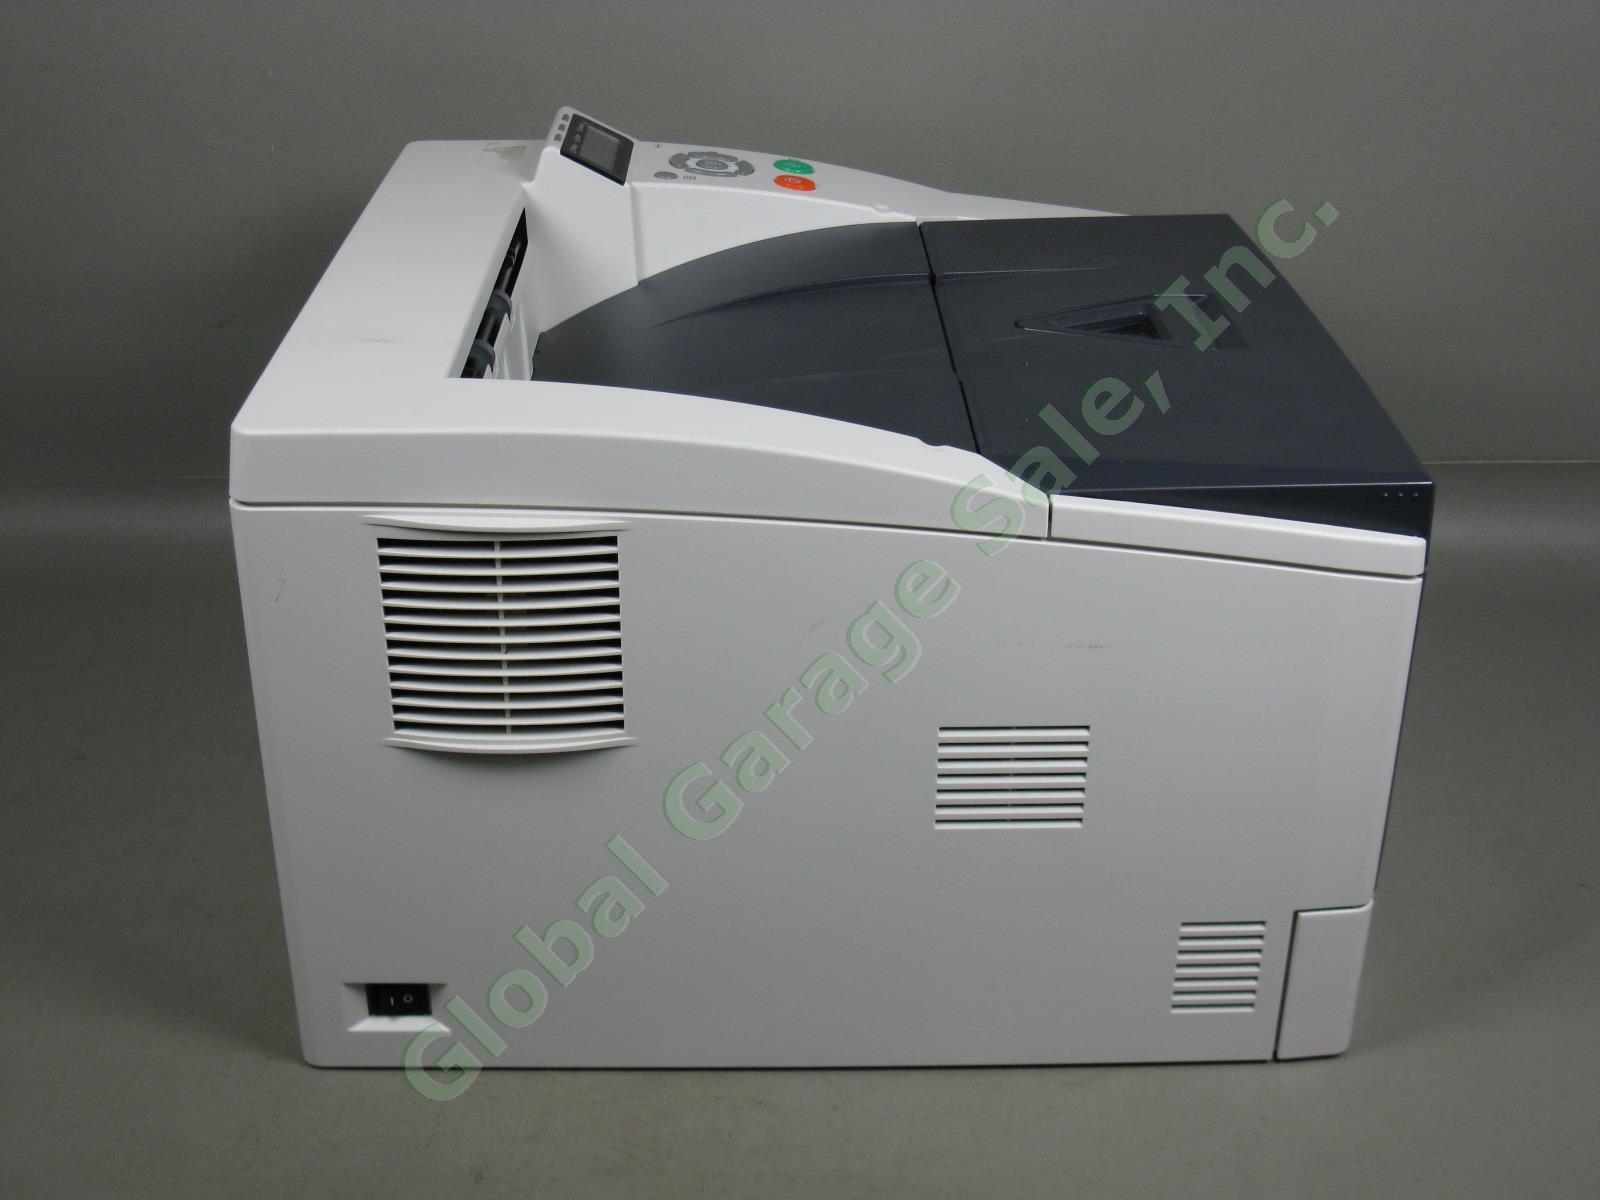 Kyocera Ecosys FS1370DN Workgroup Network Laser Printer Exc Cond! 19,510 Pages 6